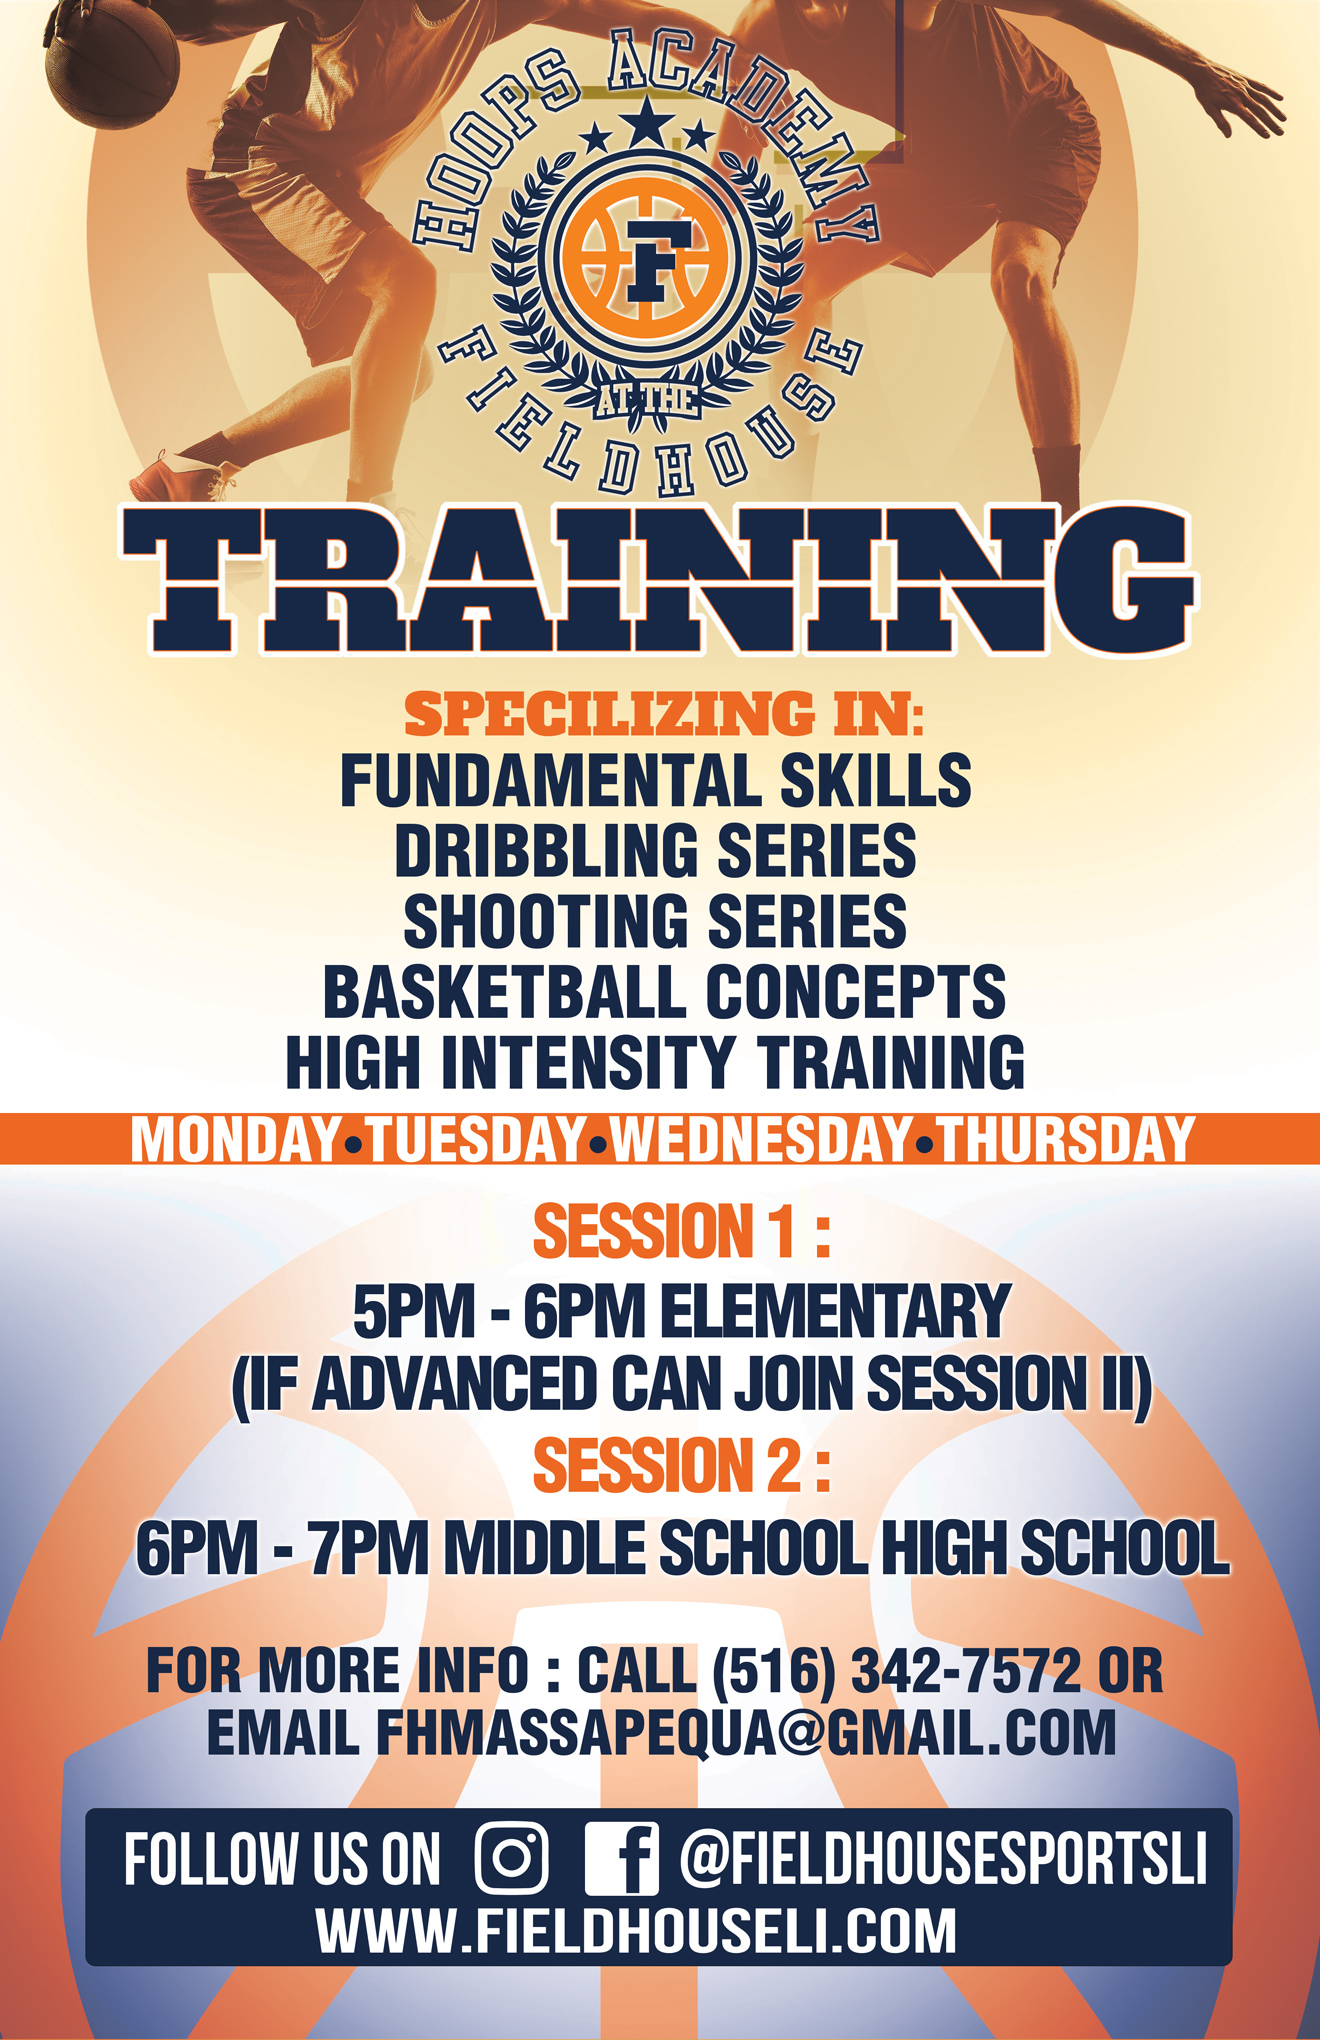 Hoops Academy Training at the Fieldhouse